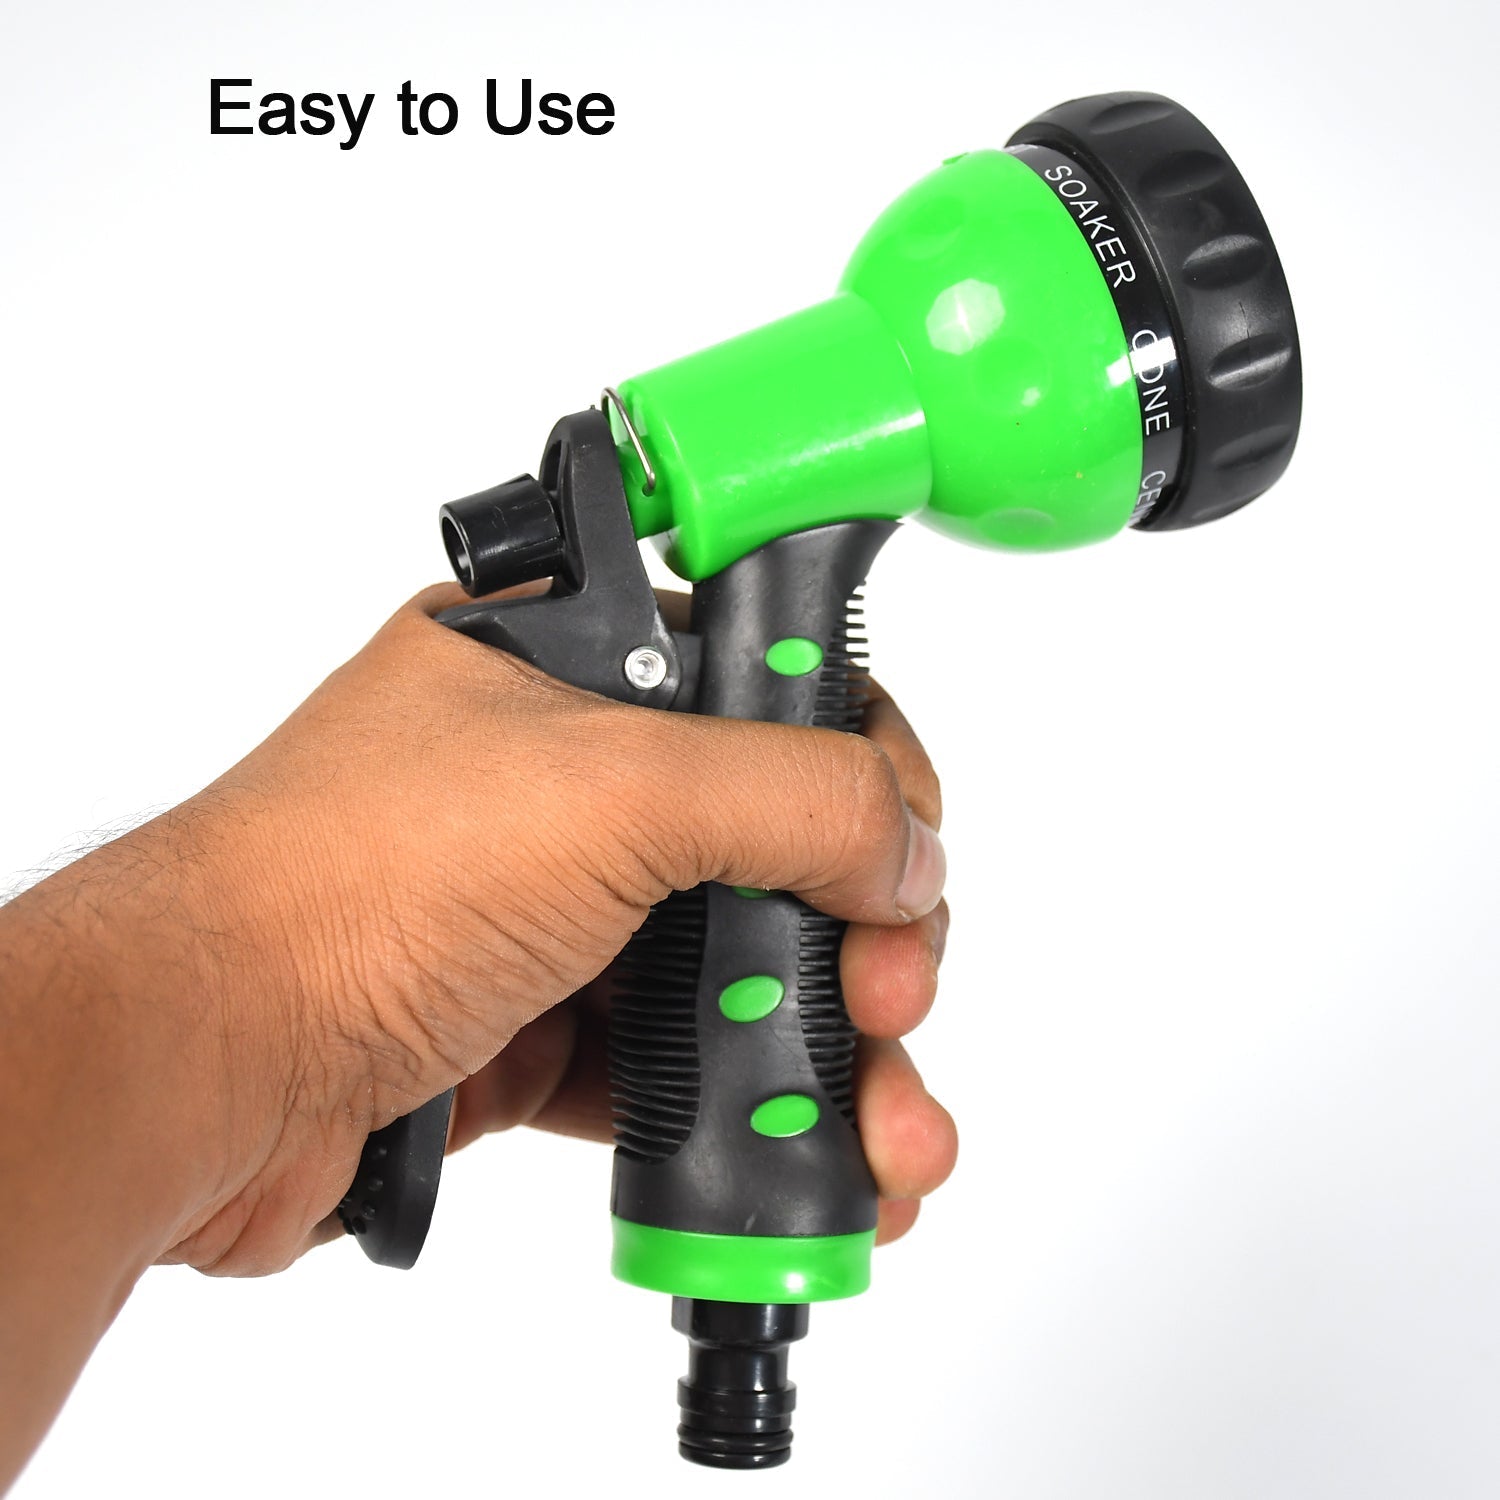 7441 Hose Nozzle Garden Hose Nozzle Hose Spray Nozzle with 8 Adjustable Patterns Front Trigger Hose Sprayer Heavy Duty Metal Water Hose Nozzle for Cleaning, Watering, Washing, Bathing DeoDap